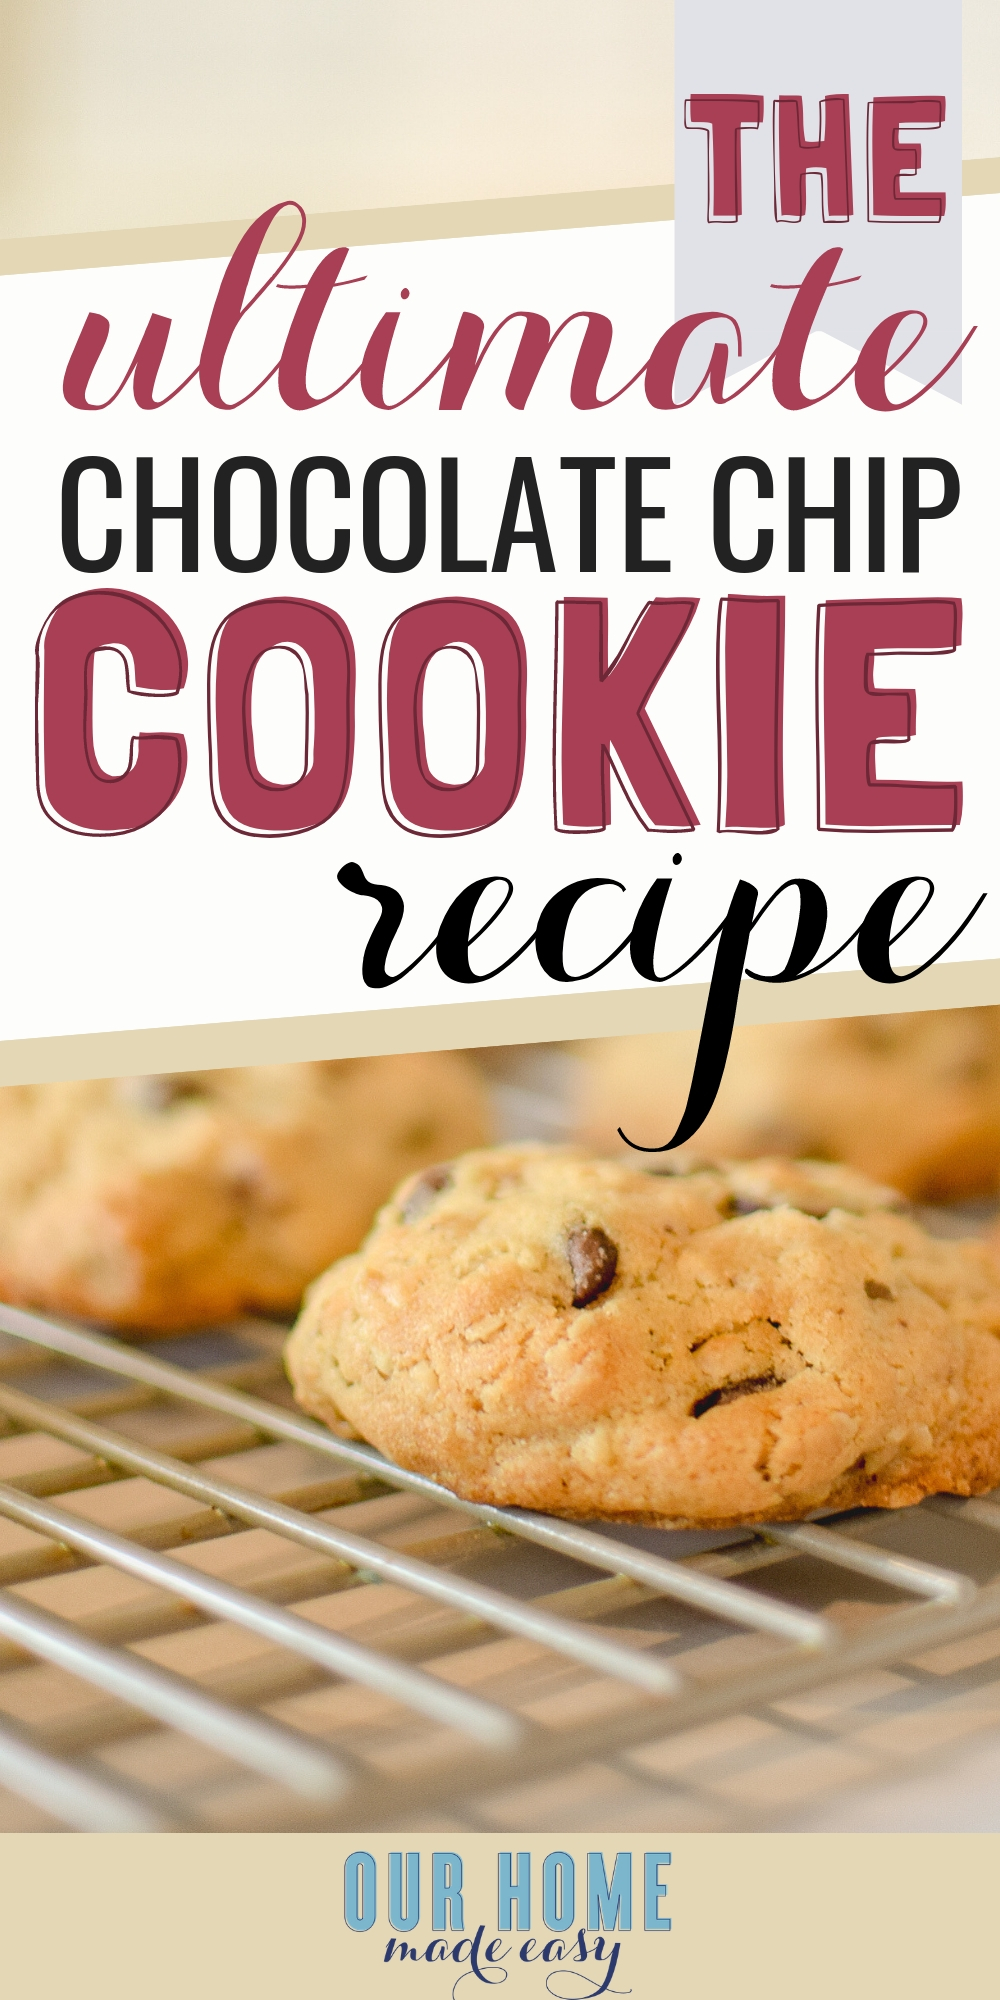 this is the ultimate cowboy cookie recipe! Packed with chocolate chips, oats, and pecans in every bite!